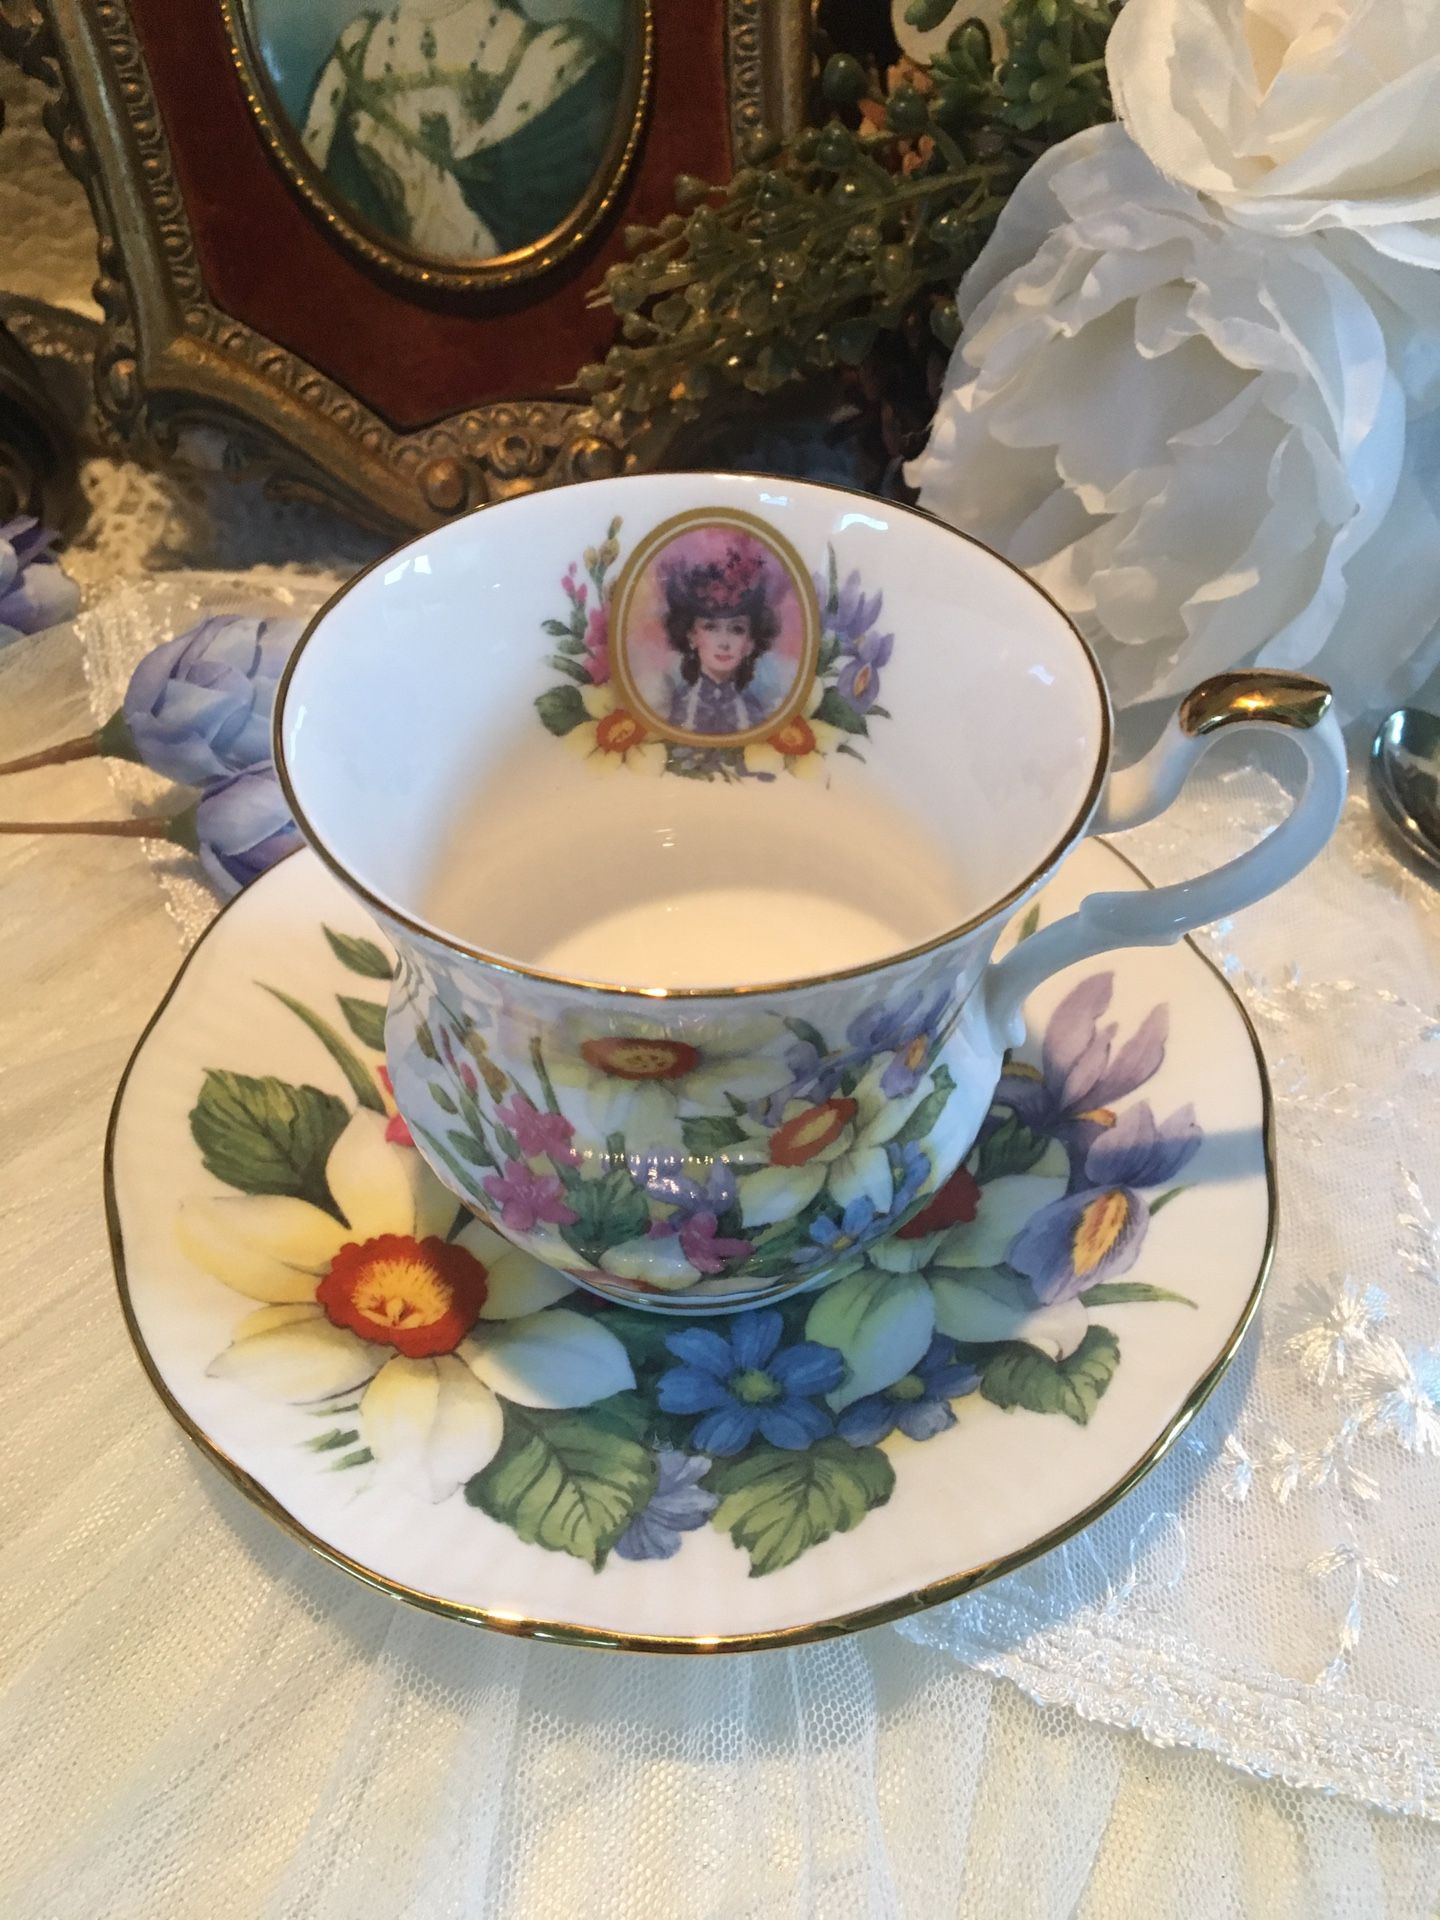 Vintage Queen's Fine Bone China Tea Cup and Saucer - Avon 1996 Figurine England ( one (1) cup and saucer pair )